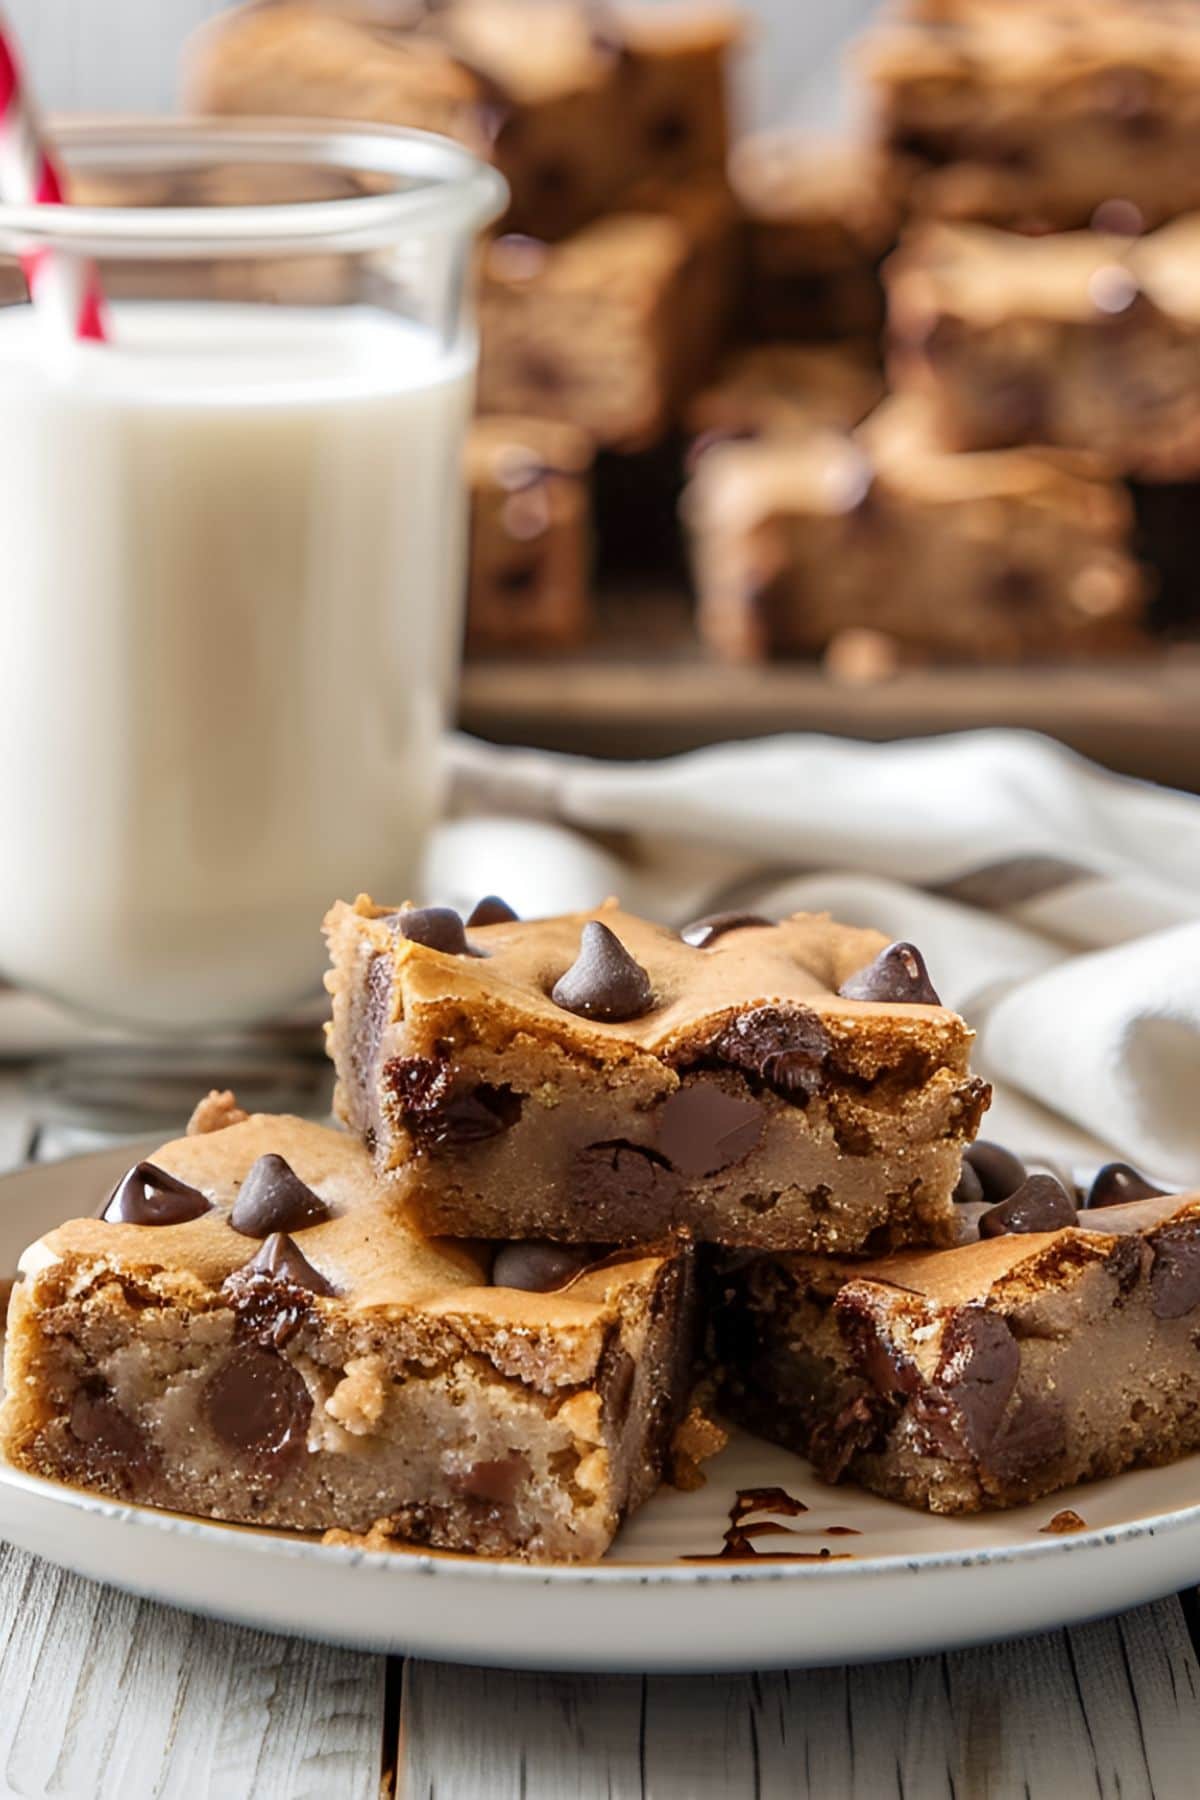 Chocolate Chip Blondie Squares on a Plate with a Glass of Milk and More Blondies in the Background